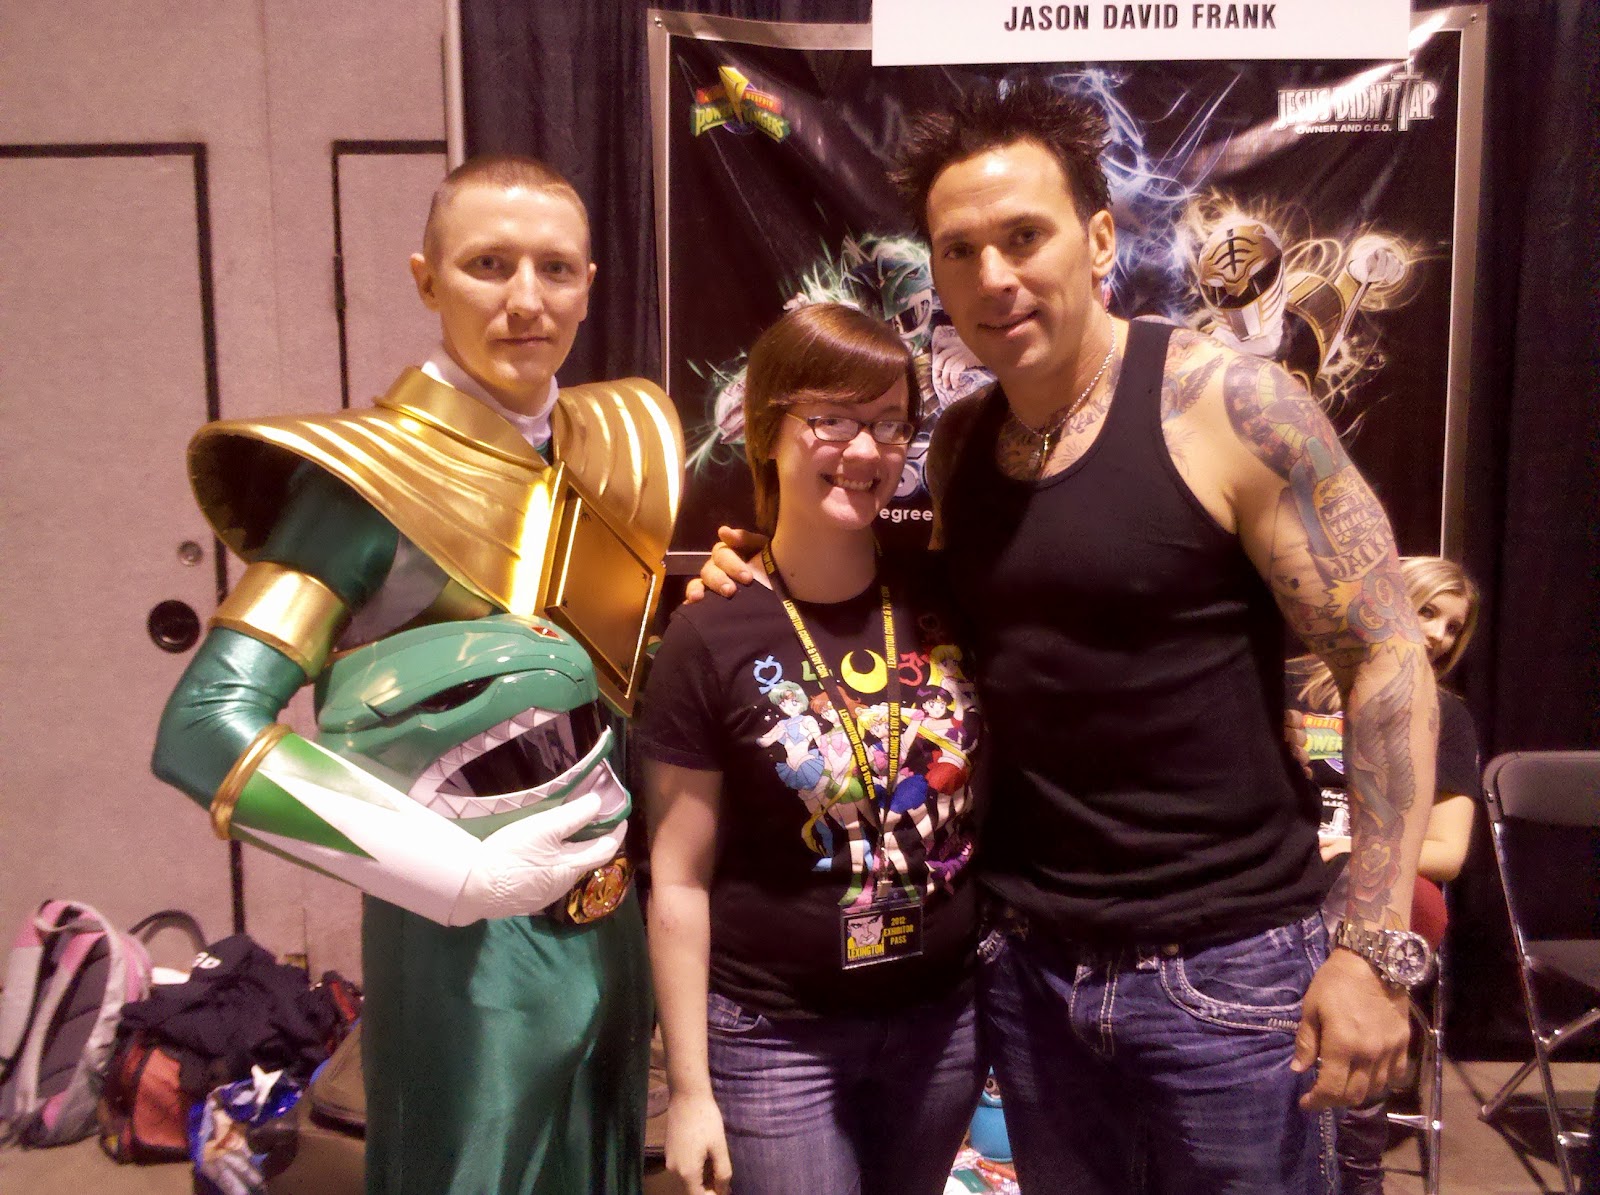 Kerry got to meet Jason Dave Frank who portrays Tommy the Green/White Range...